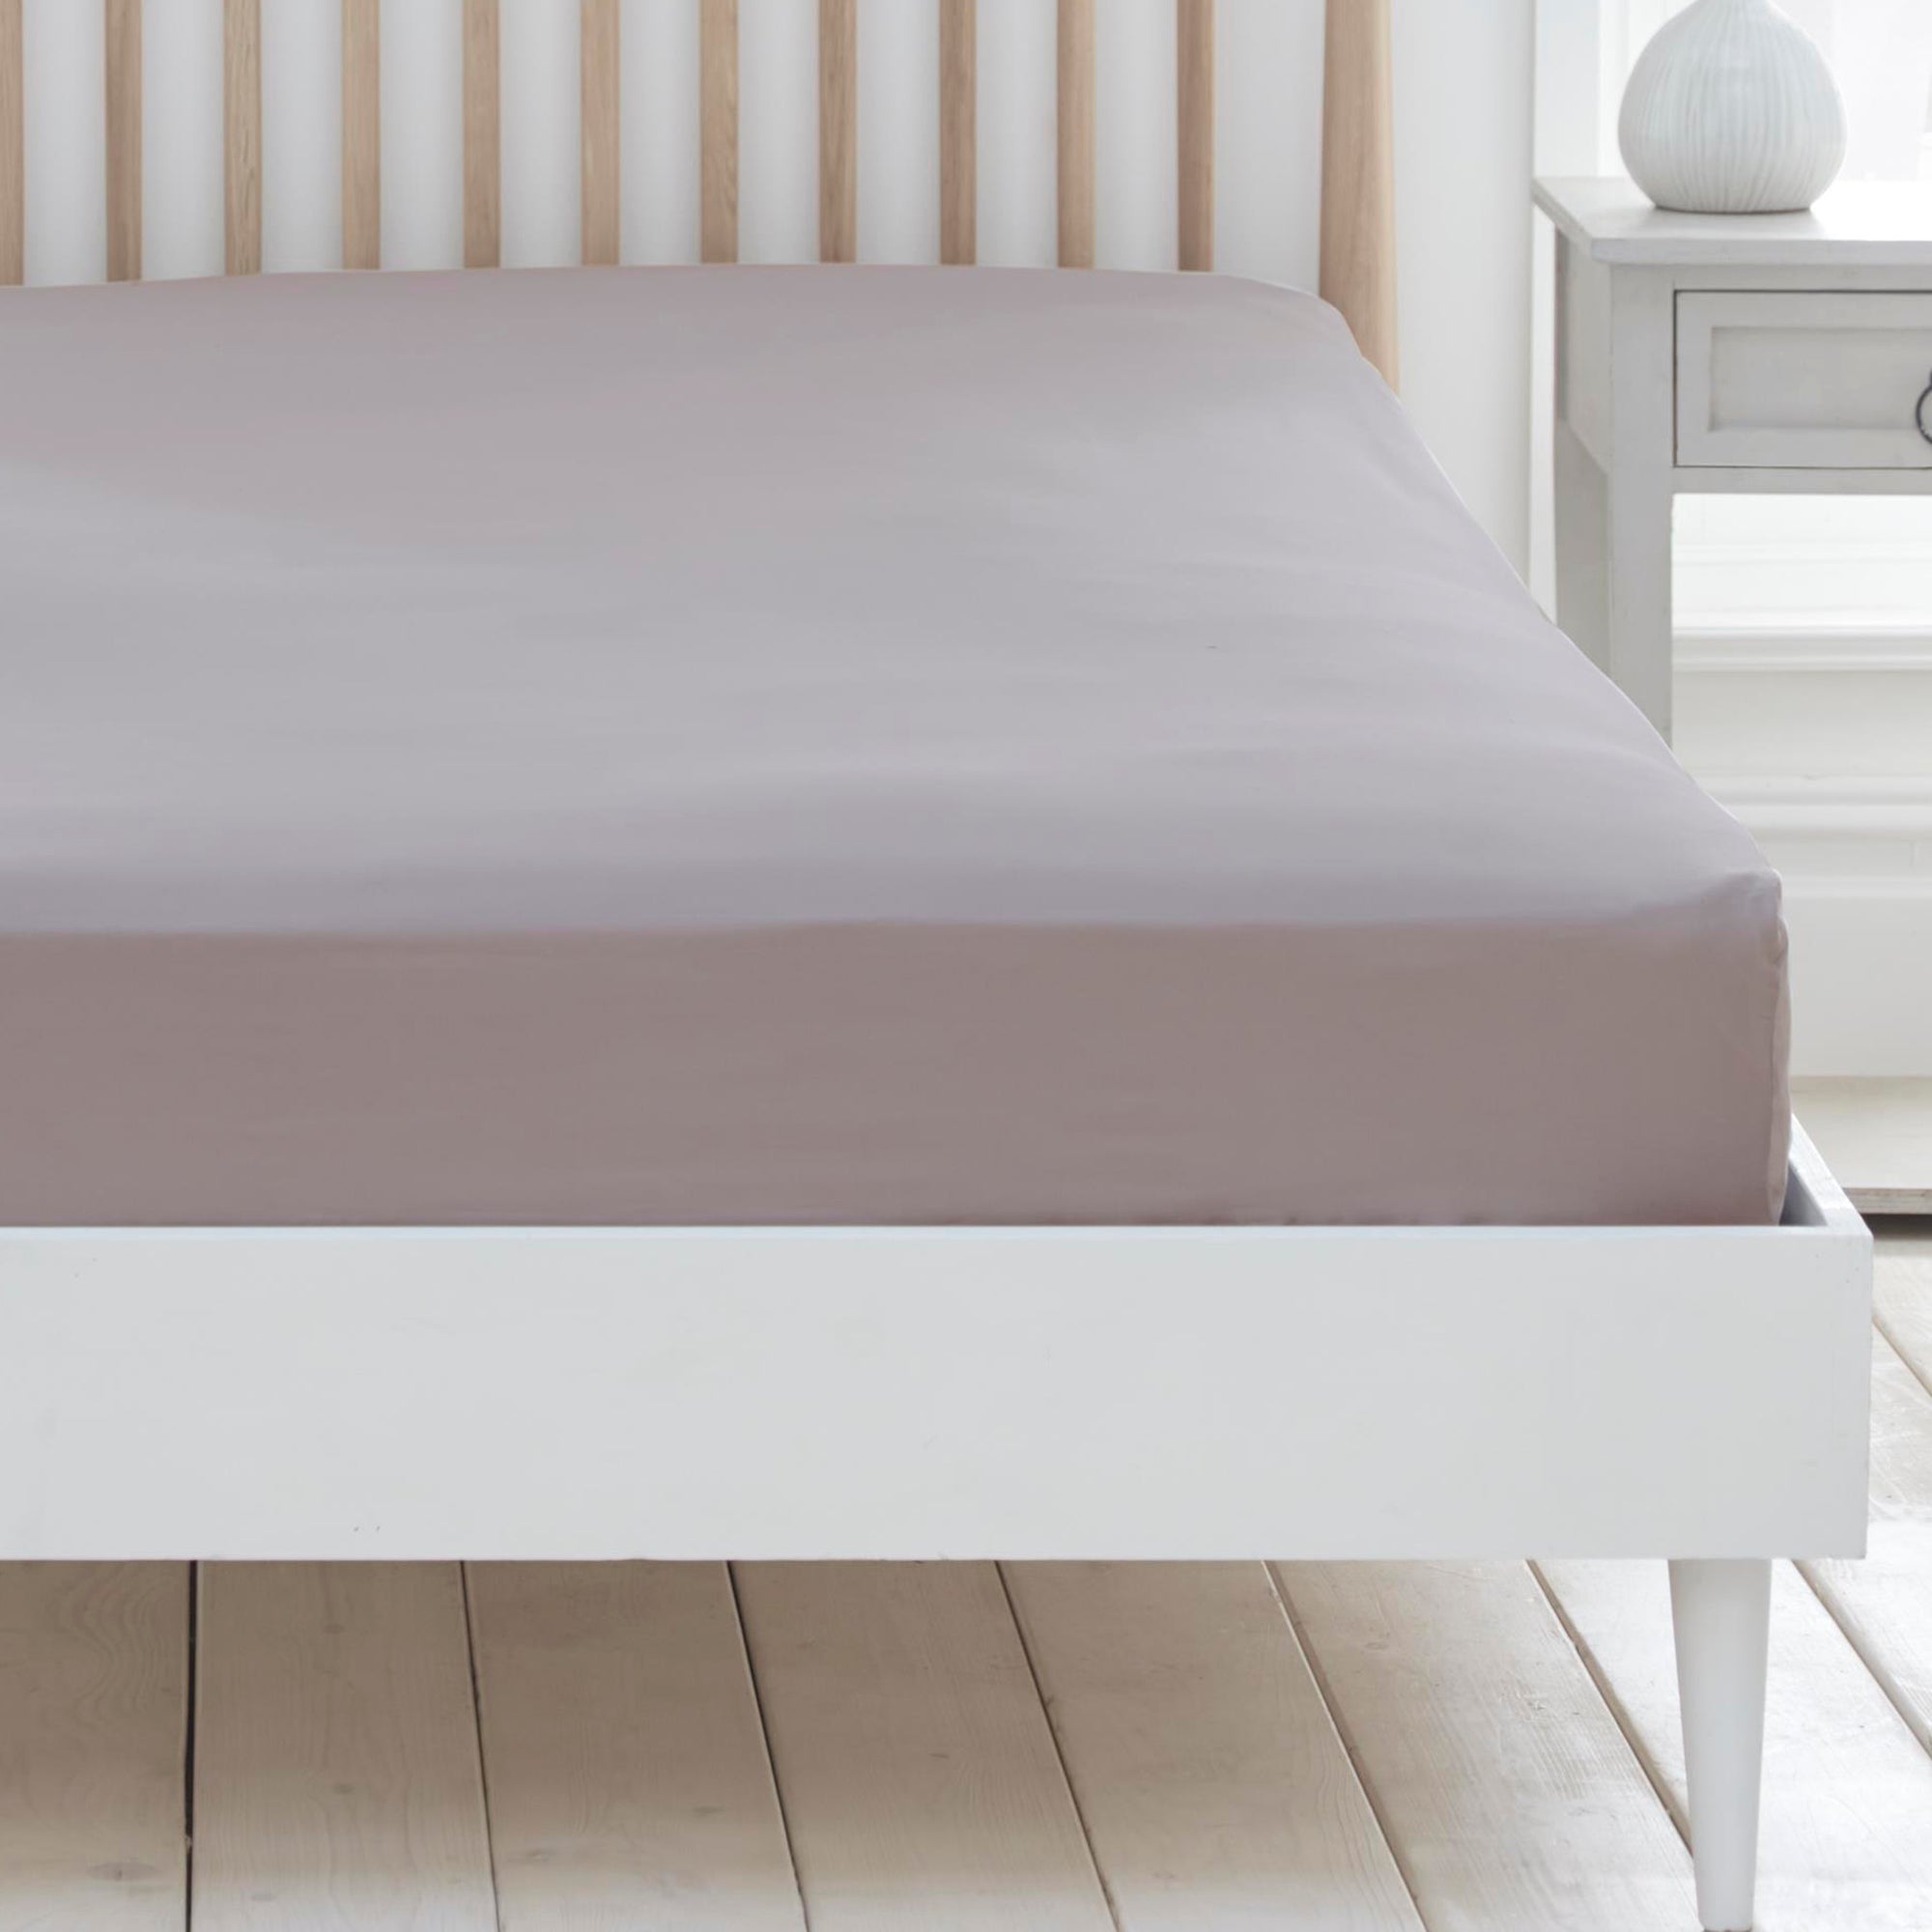 Sheets - Eco-Friendly 28cm Fitted Bed Sheet & Optional Pillowcases in Amethyst - by Drift Home